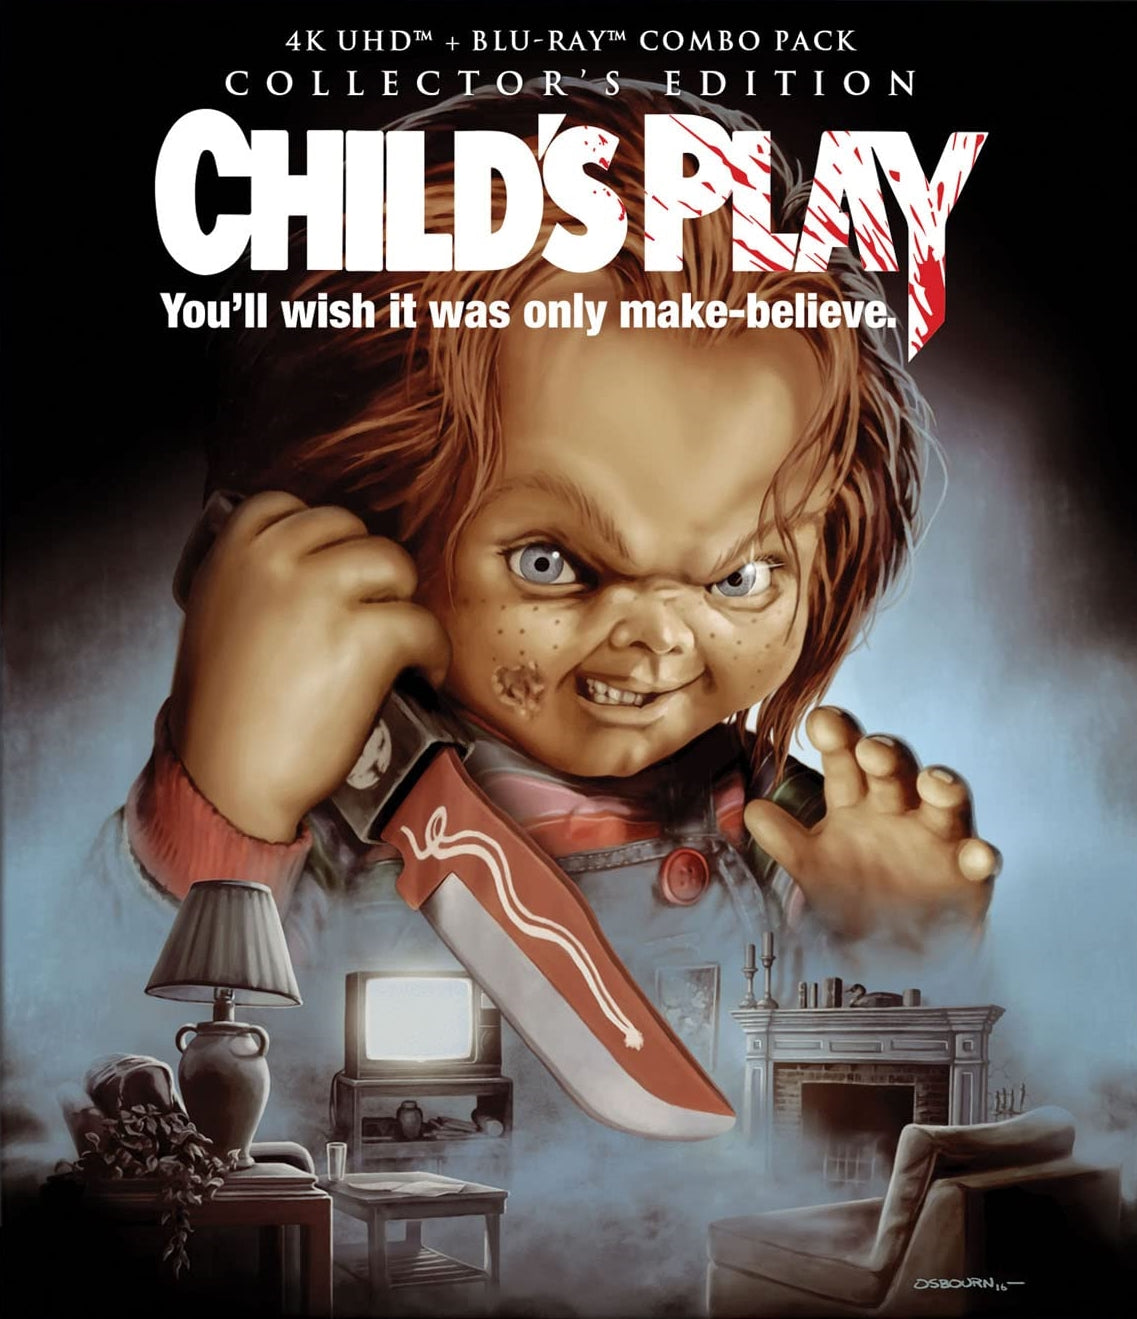 CHILD'S PLAY (COLLECTOR'S EDITION) 4K UHD/BLU-RAY